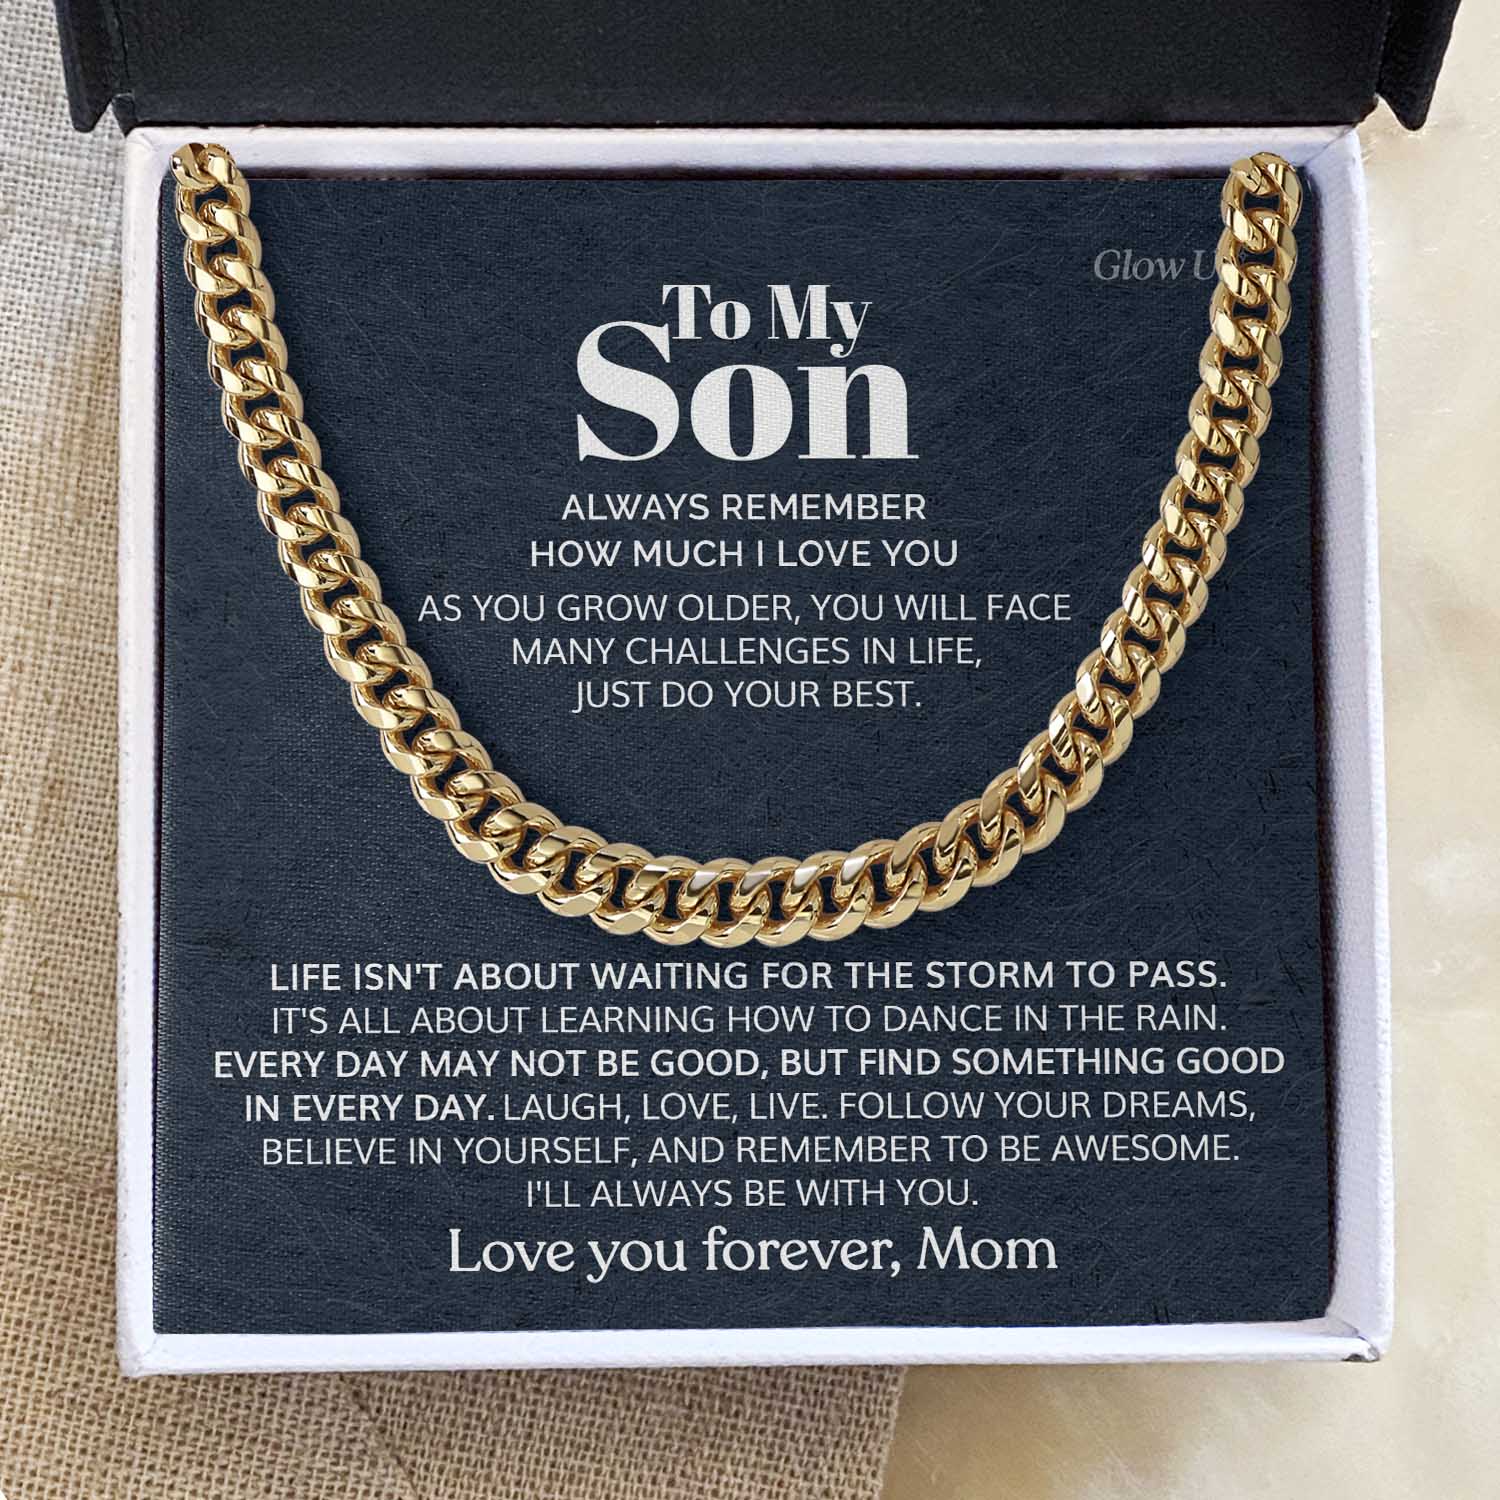 ShineOn Fulfillment Jewelry 14K Yellow Gold Finish / Standard Box To my Son - Always remember - Cuban Link Chain